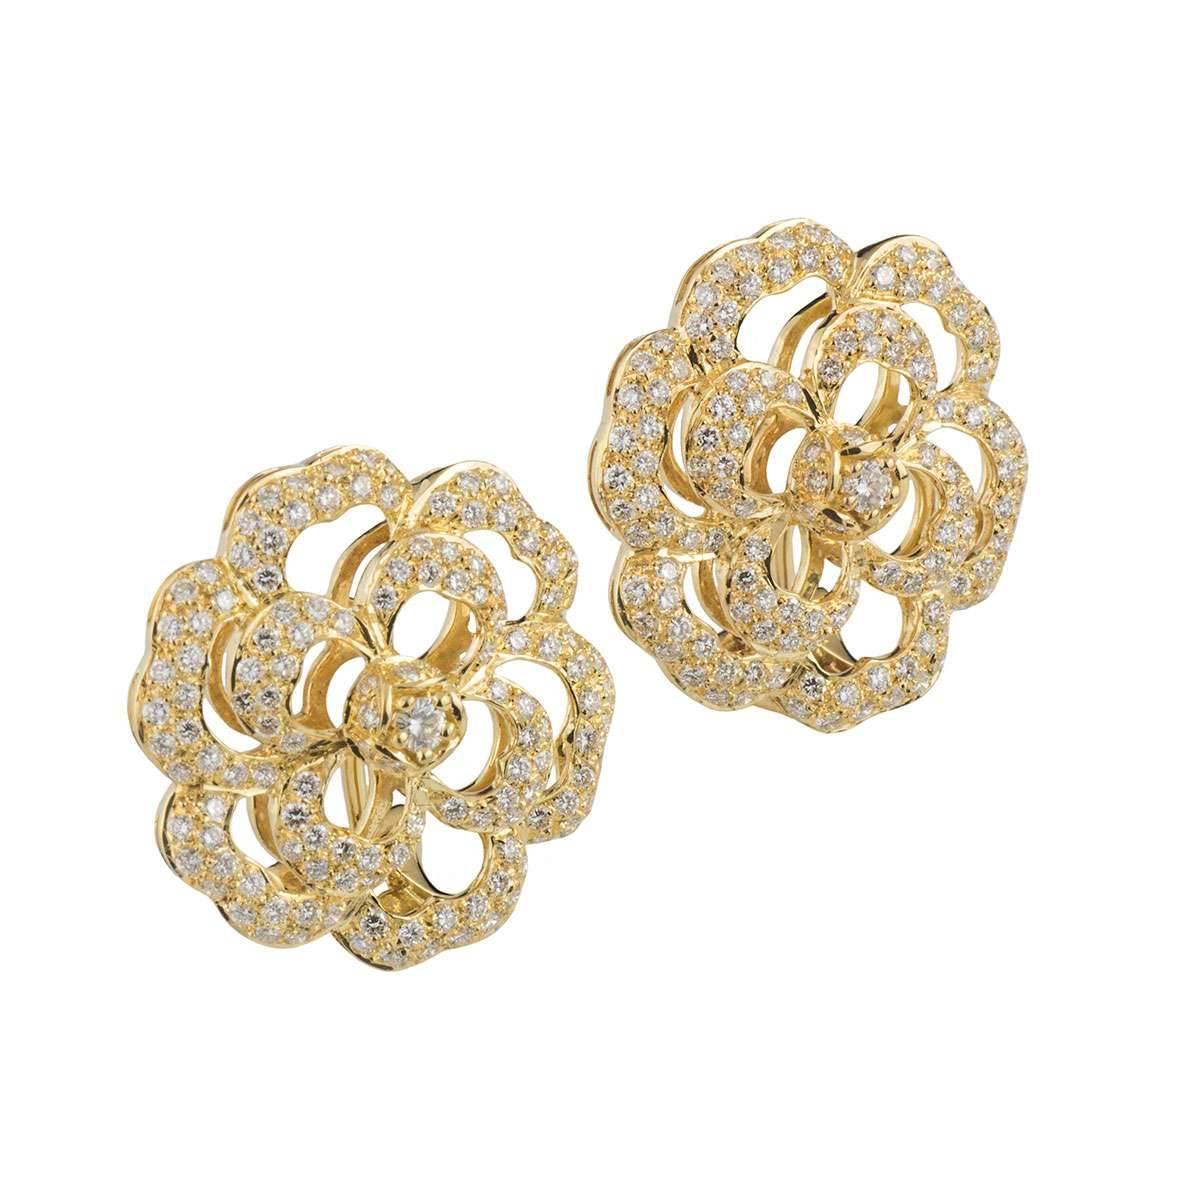 A sparkly pair of 18k yellow gold diamond earrings. The earrings comprise of an open work flower motif, each earring comprises of 127 round brilliant cut diamonds with a diamond in the centre. The diamonds have a total weight of 1.85ct, G colour and